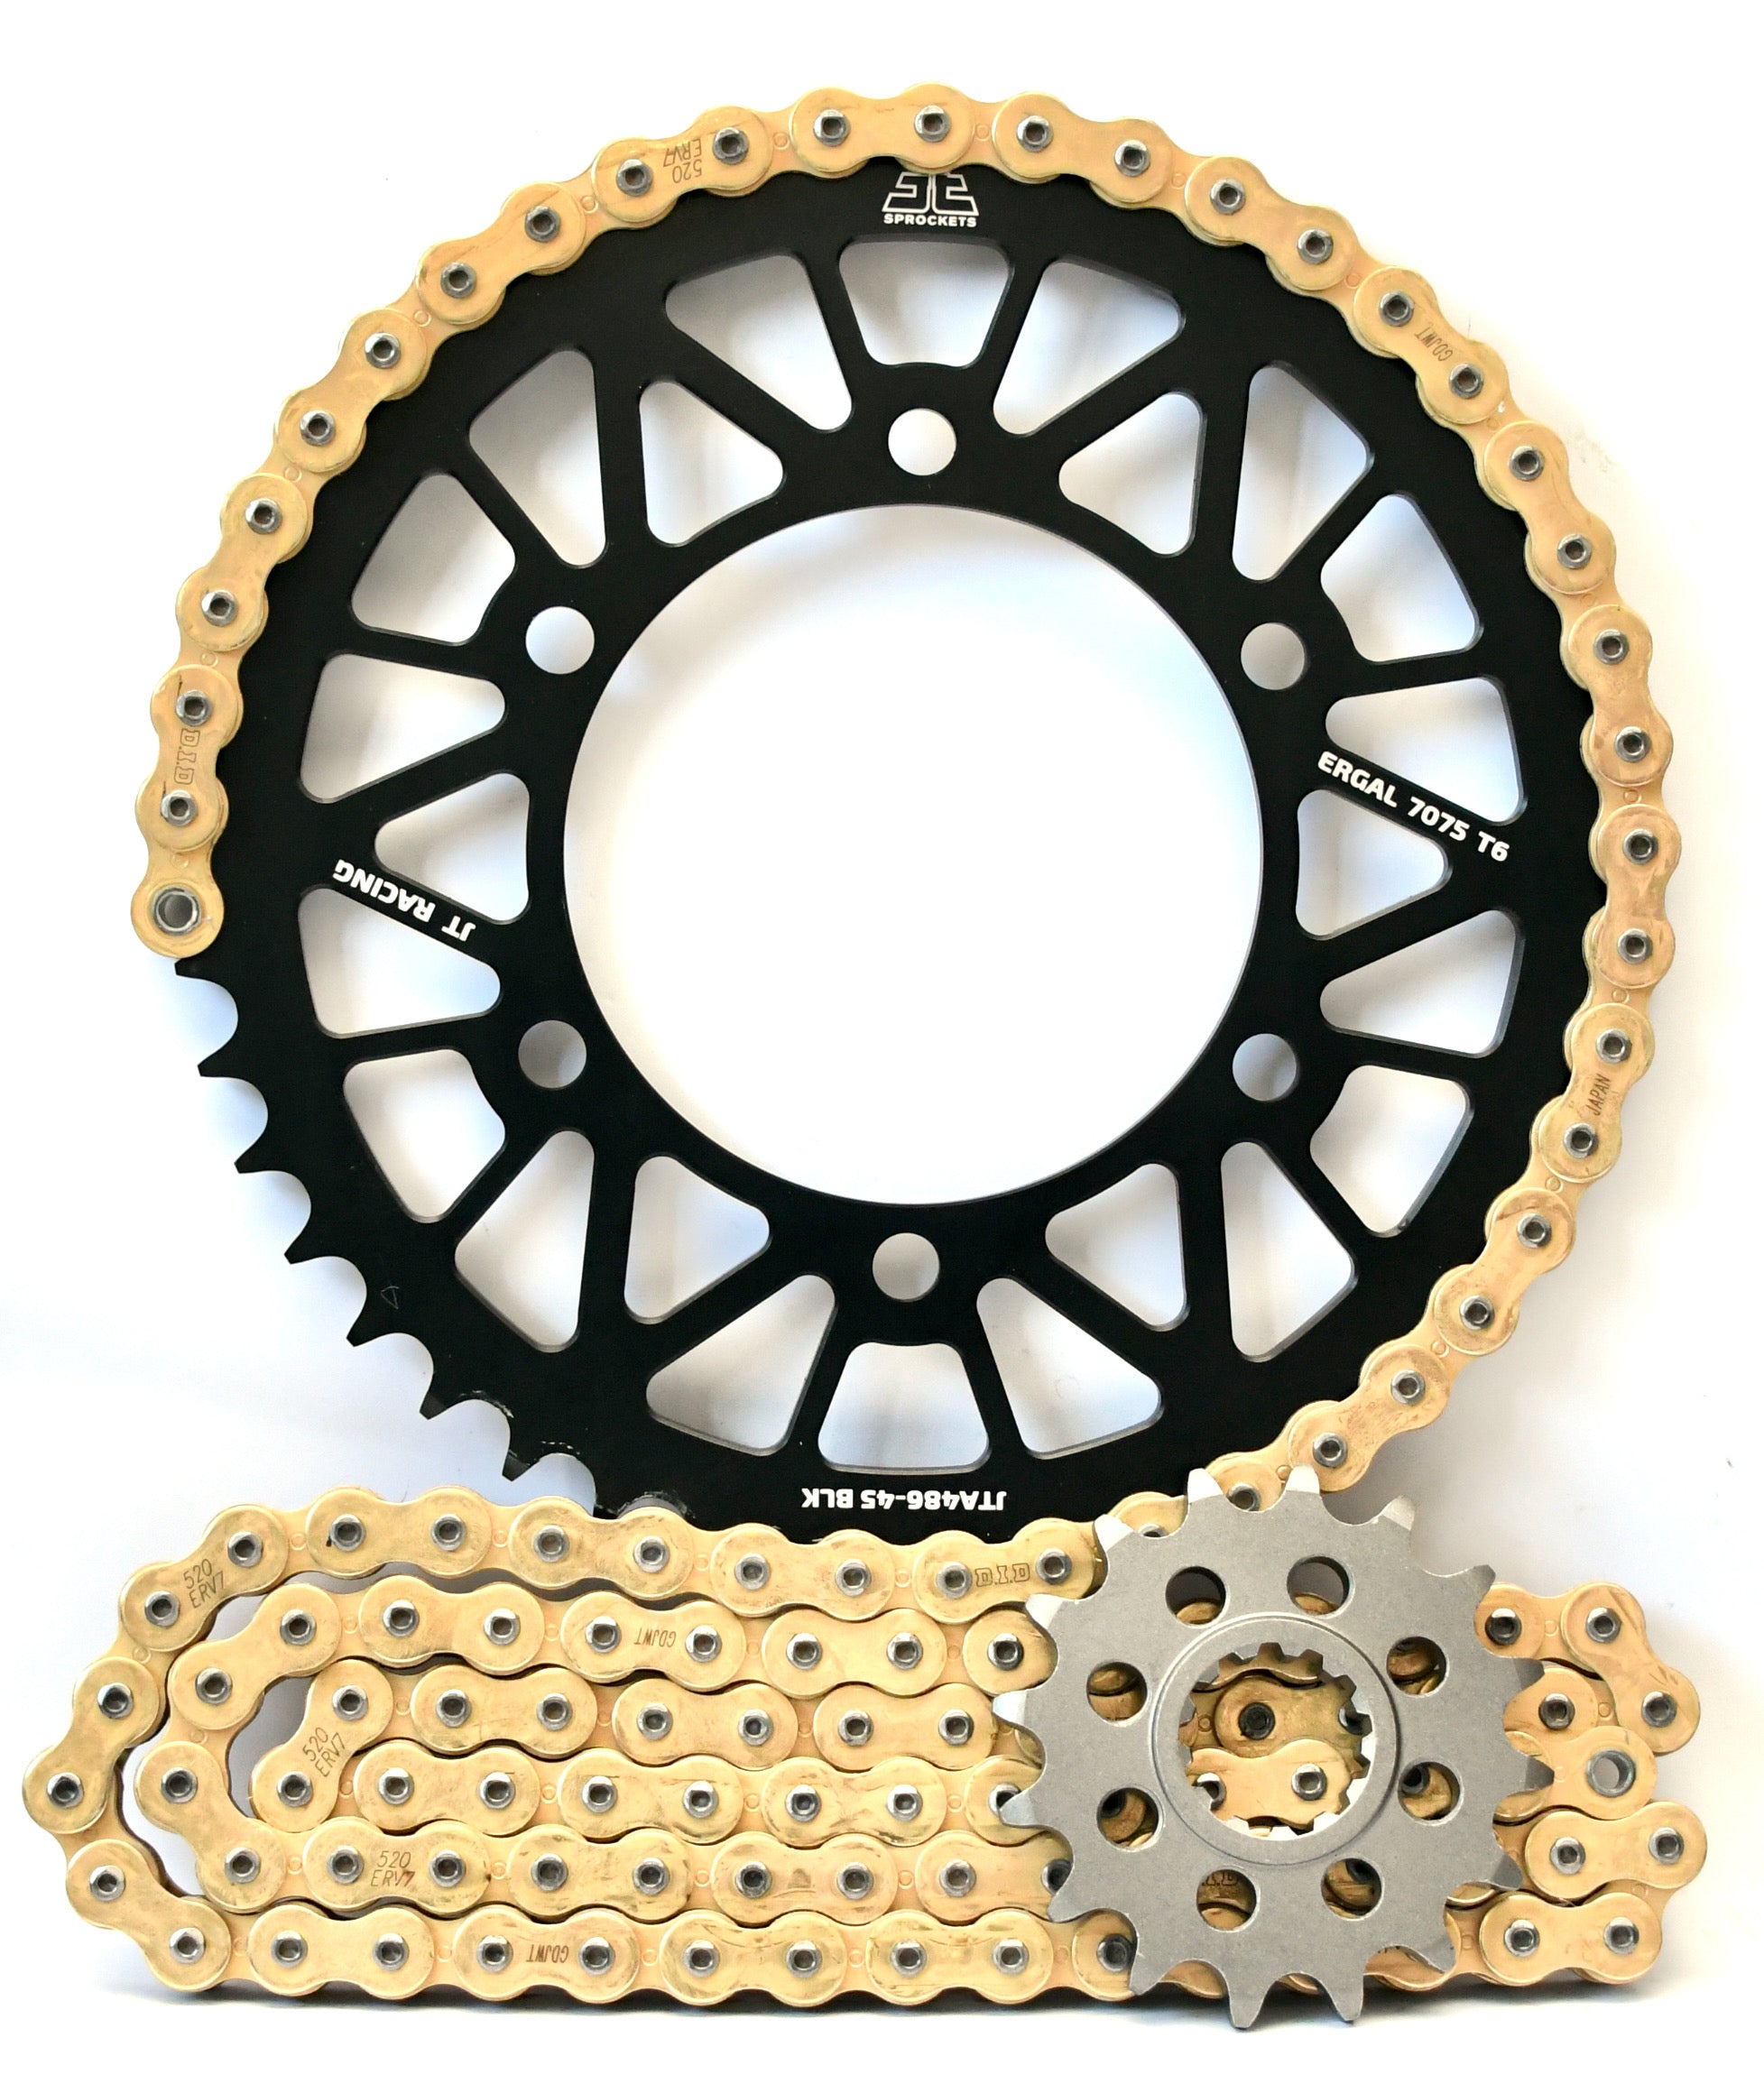 JT Racelite and DID Chain & Sprocket Kit for Kawasaki ZX6R 2007-2018 - Standard Gearing